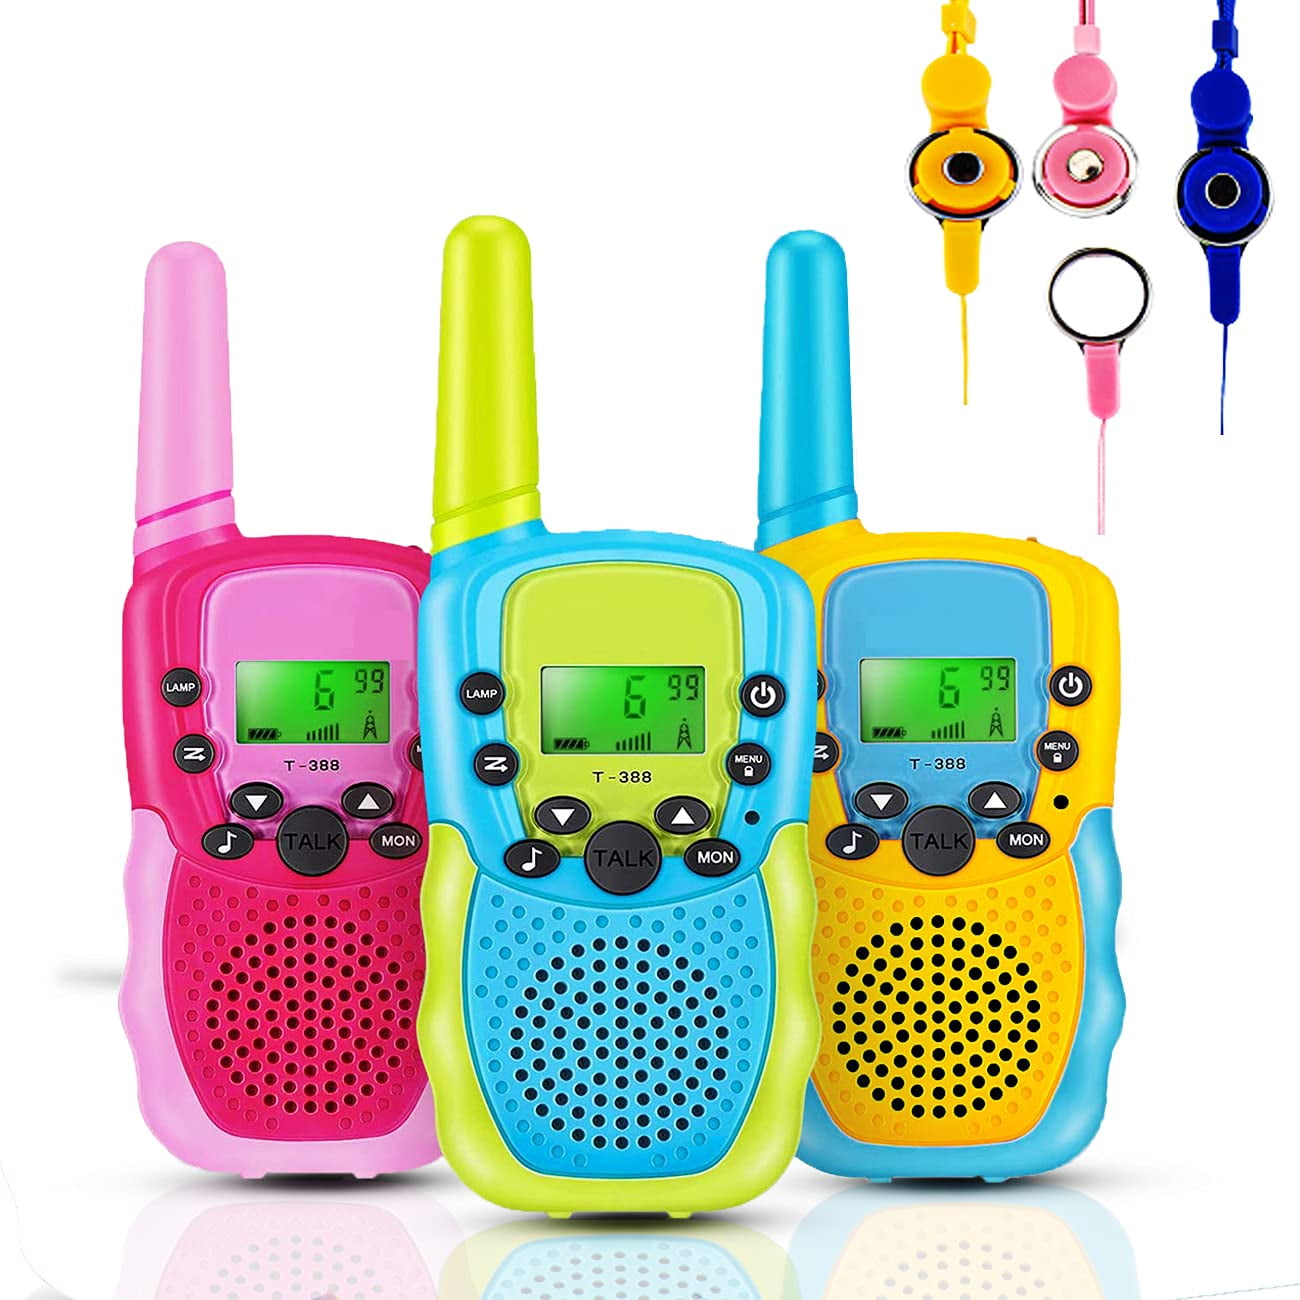 Long Range Walkie-talkies, Kids Walkie Talkies, Mile Outdoor Way Radios  Game Toys with Flashlight, 22 Channels, Gifts for Boys Girls to Camping  Hiking Adventure (3 Pack)